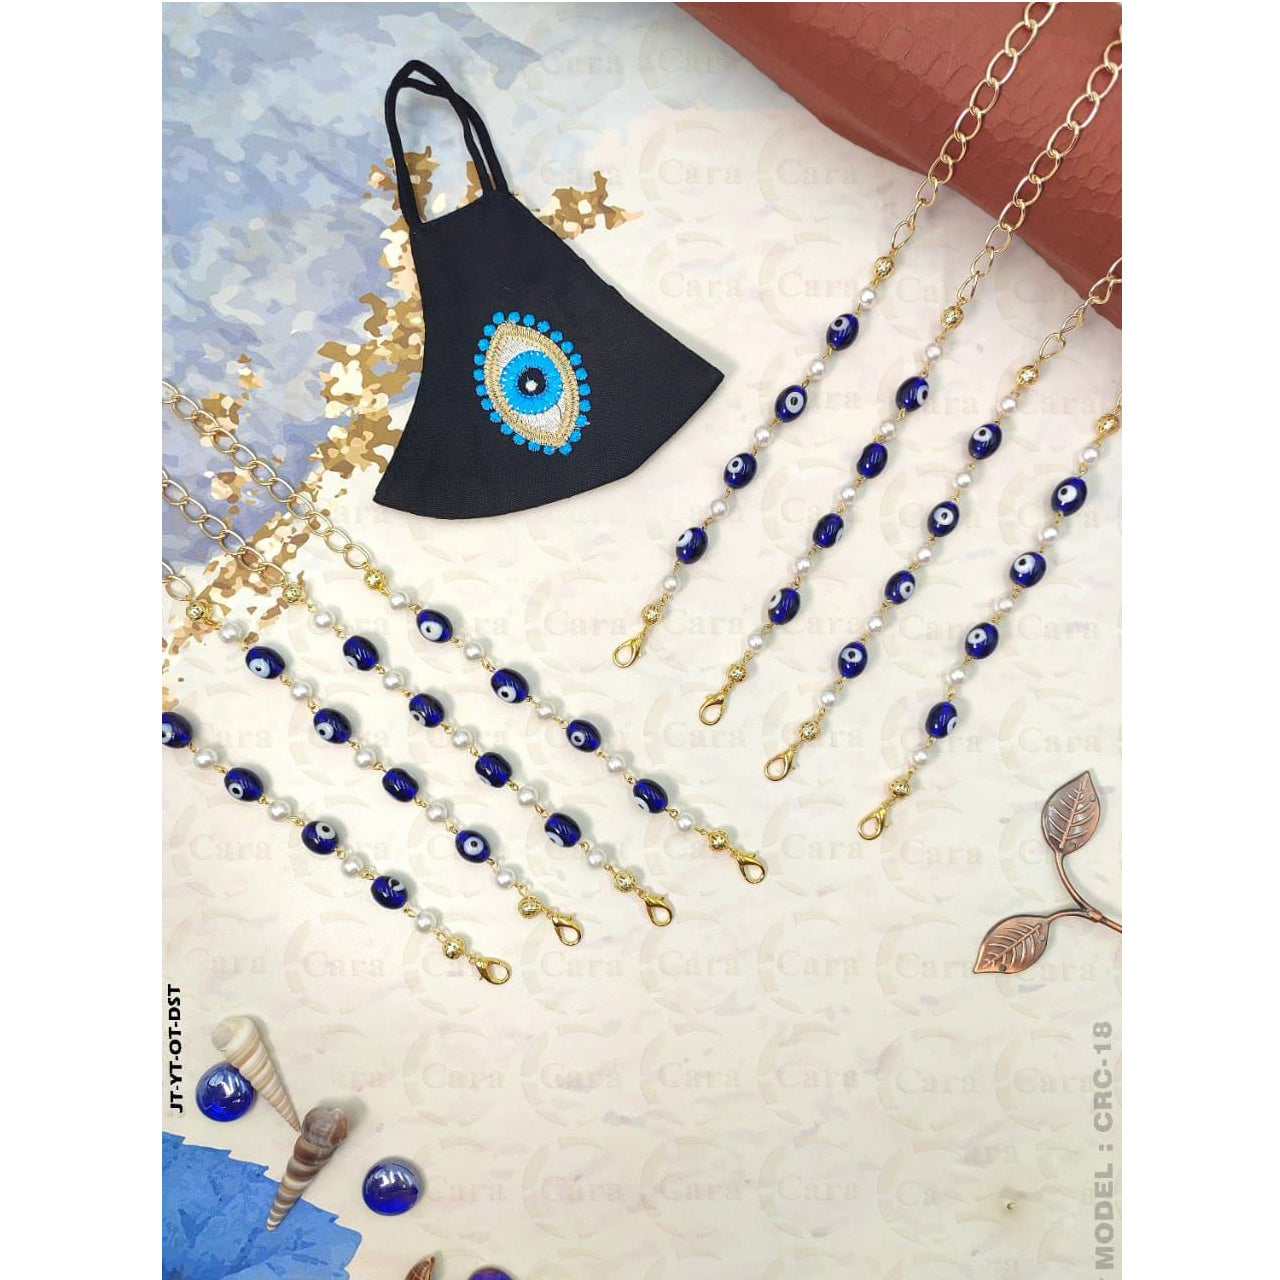 Evil Eye Handcrafted Dark Blue Silver Brass Beads Pearl Mask Chain For Women